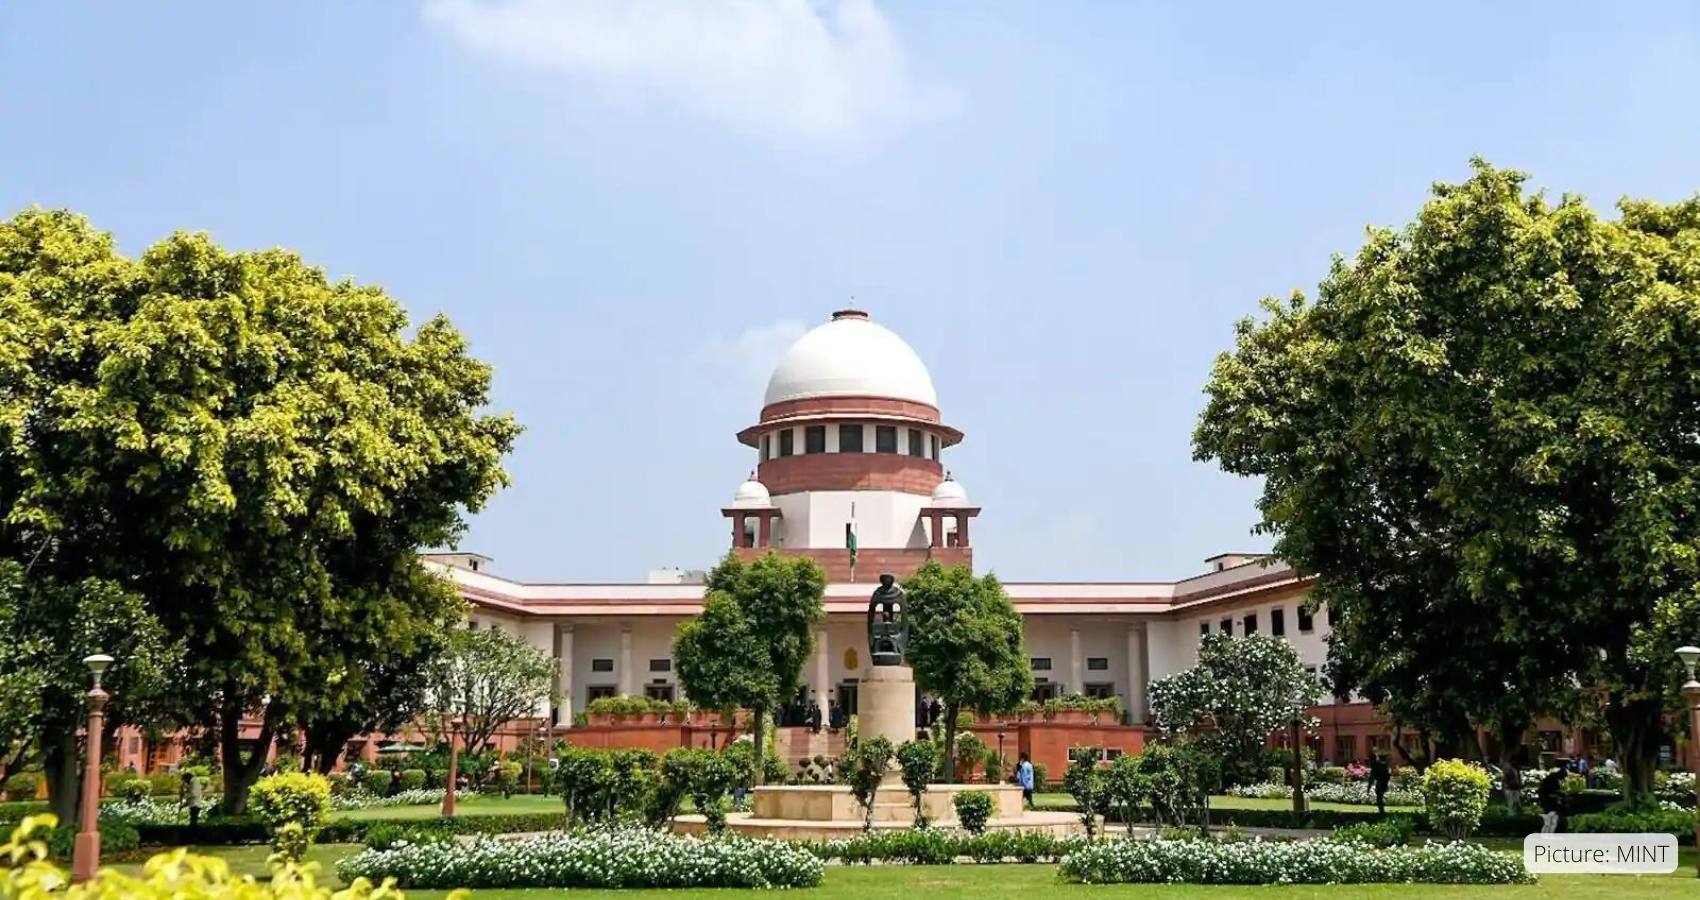 Reservation Policy Cannot Stay Indefinitely, Says India’s Supreme Court